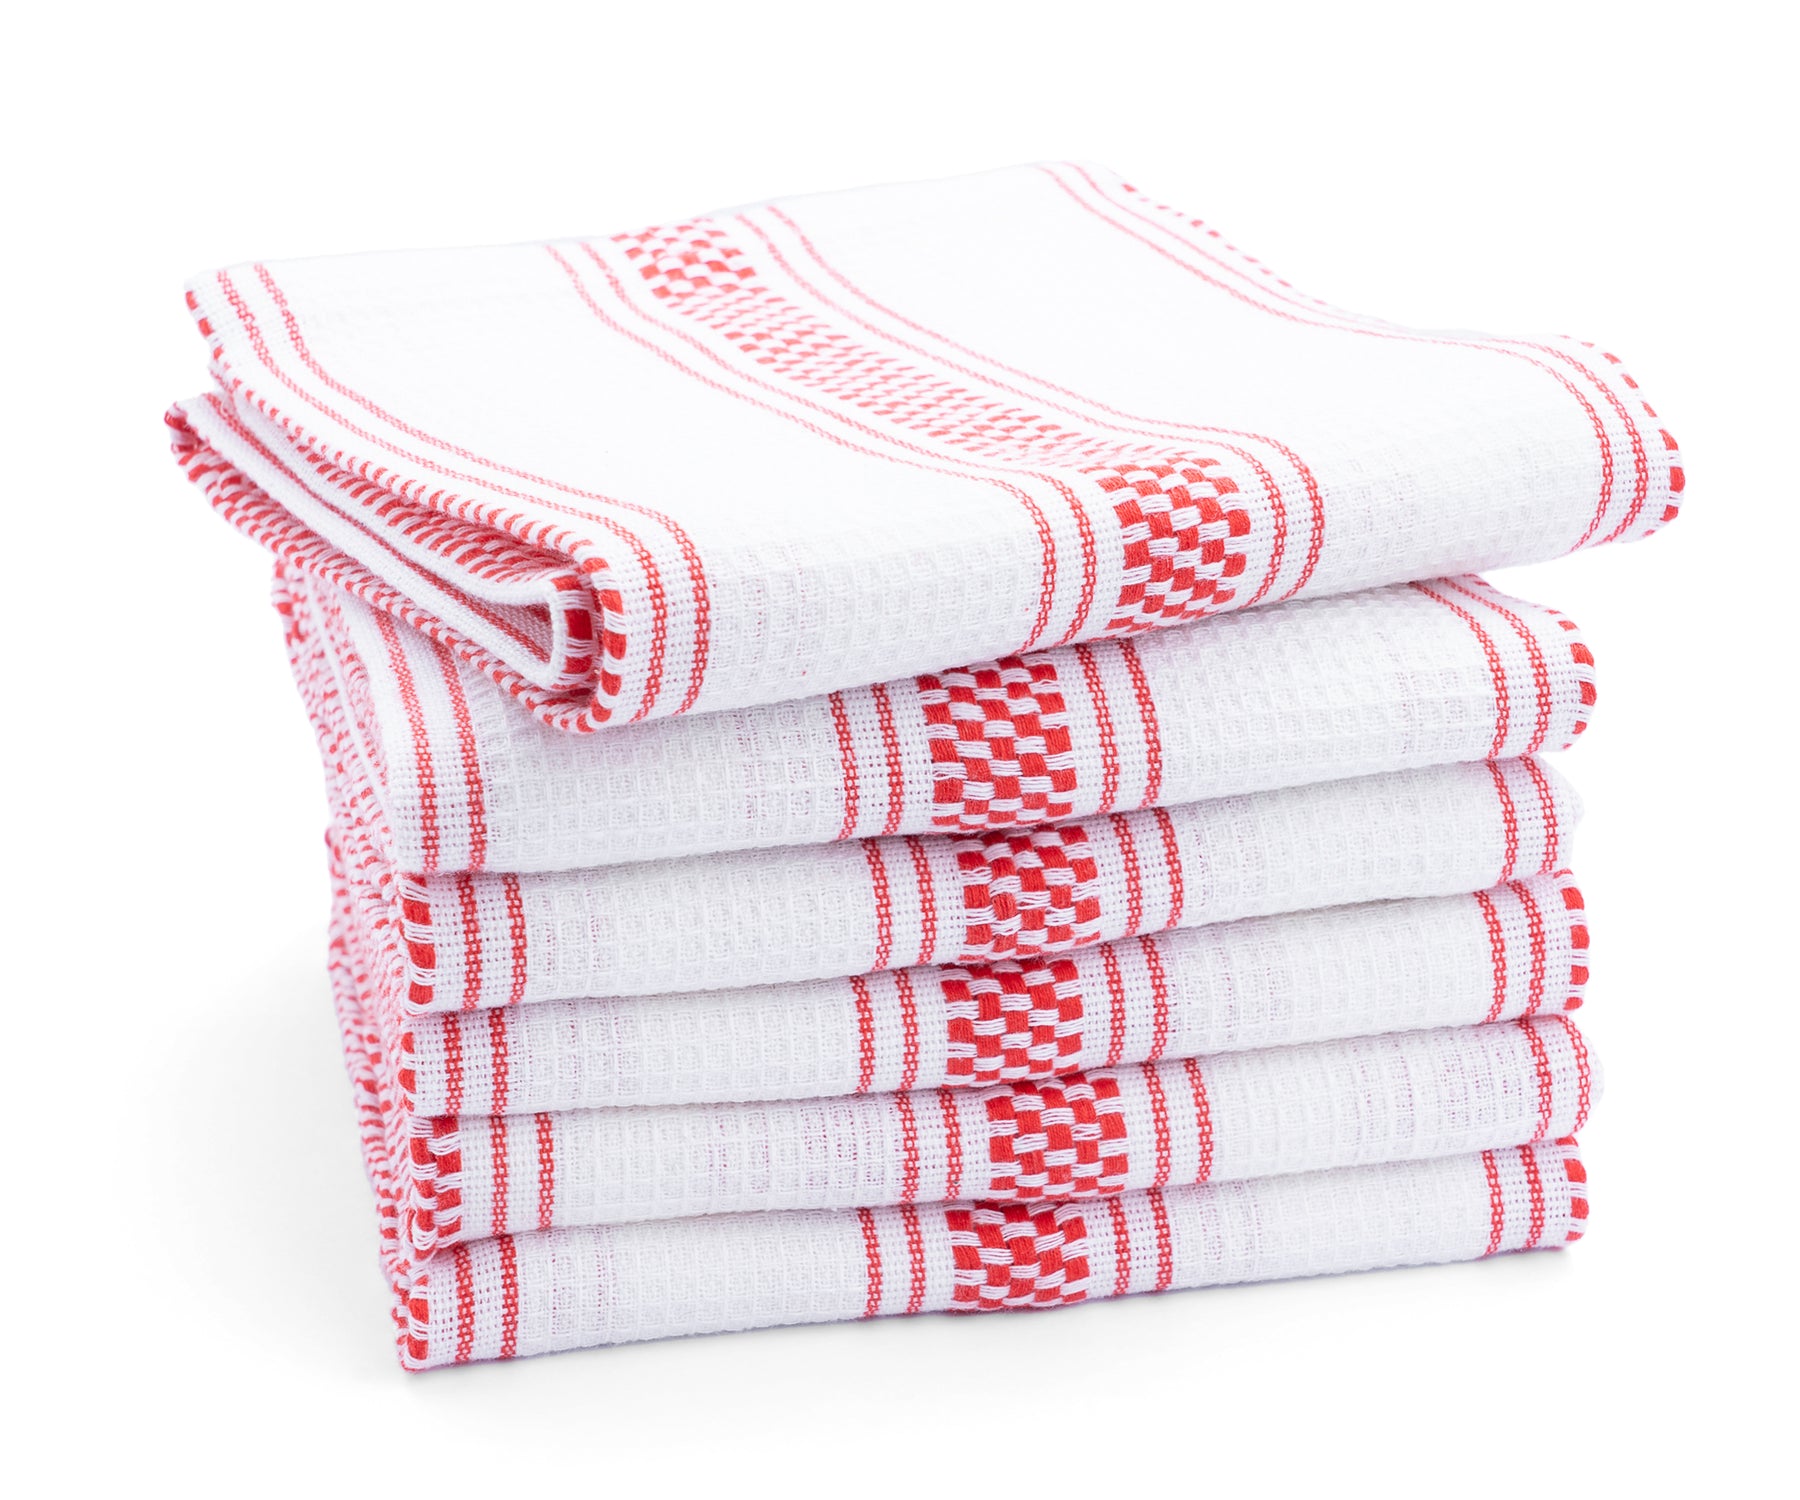 red striped dish towels, red striped kitchen towels, red and white dish towels, red and white kitchen towels, red cotton dishcloths, red cotton dish towel, red dish towels